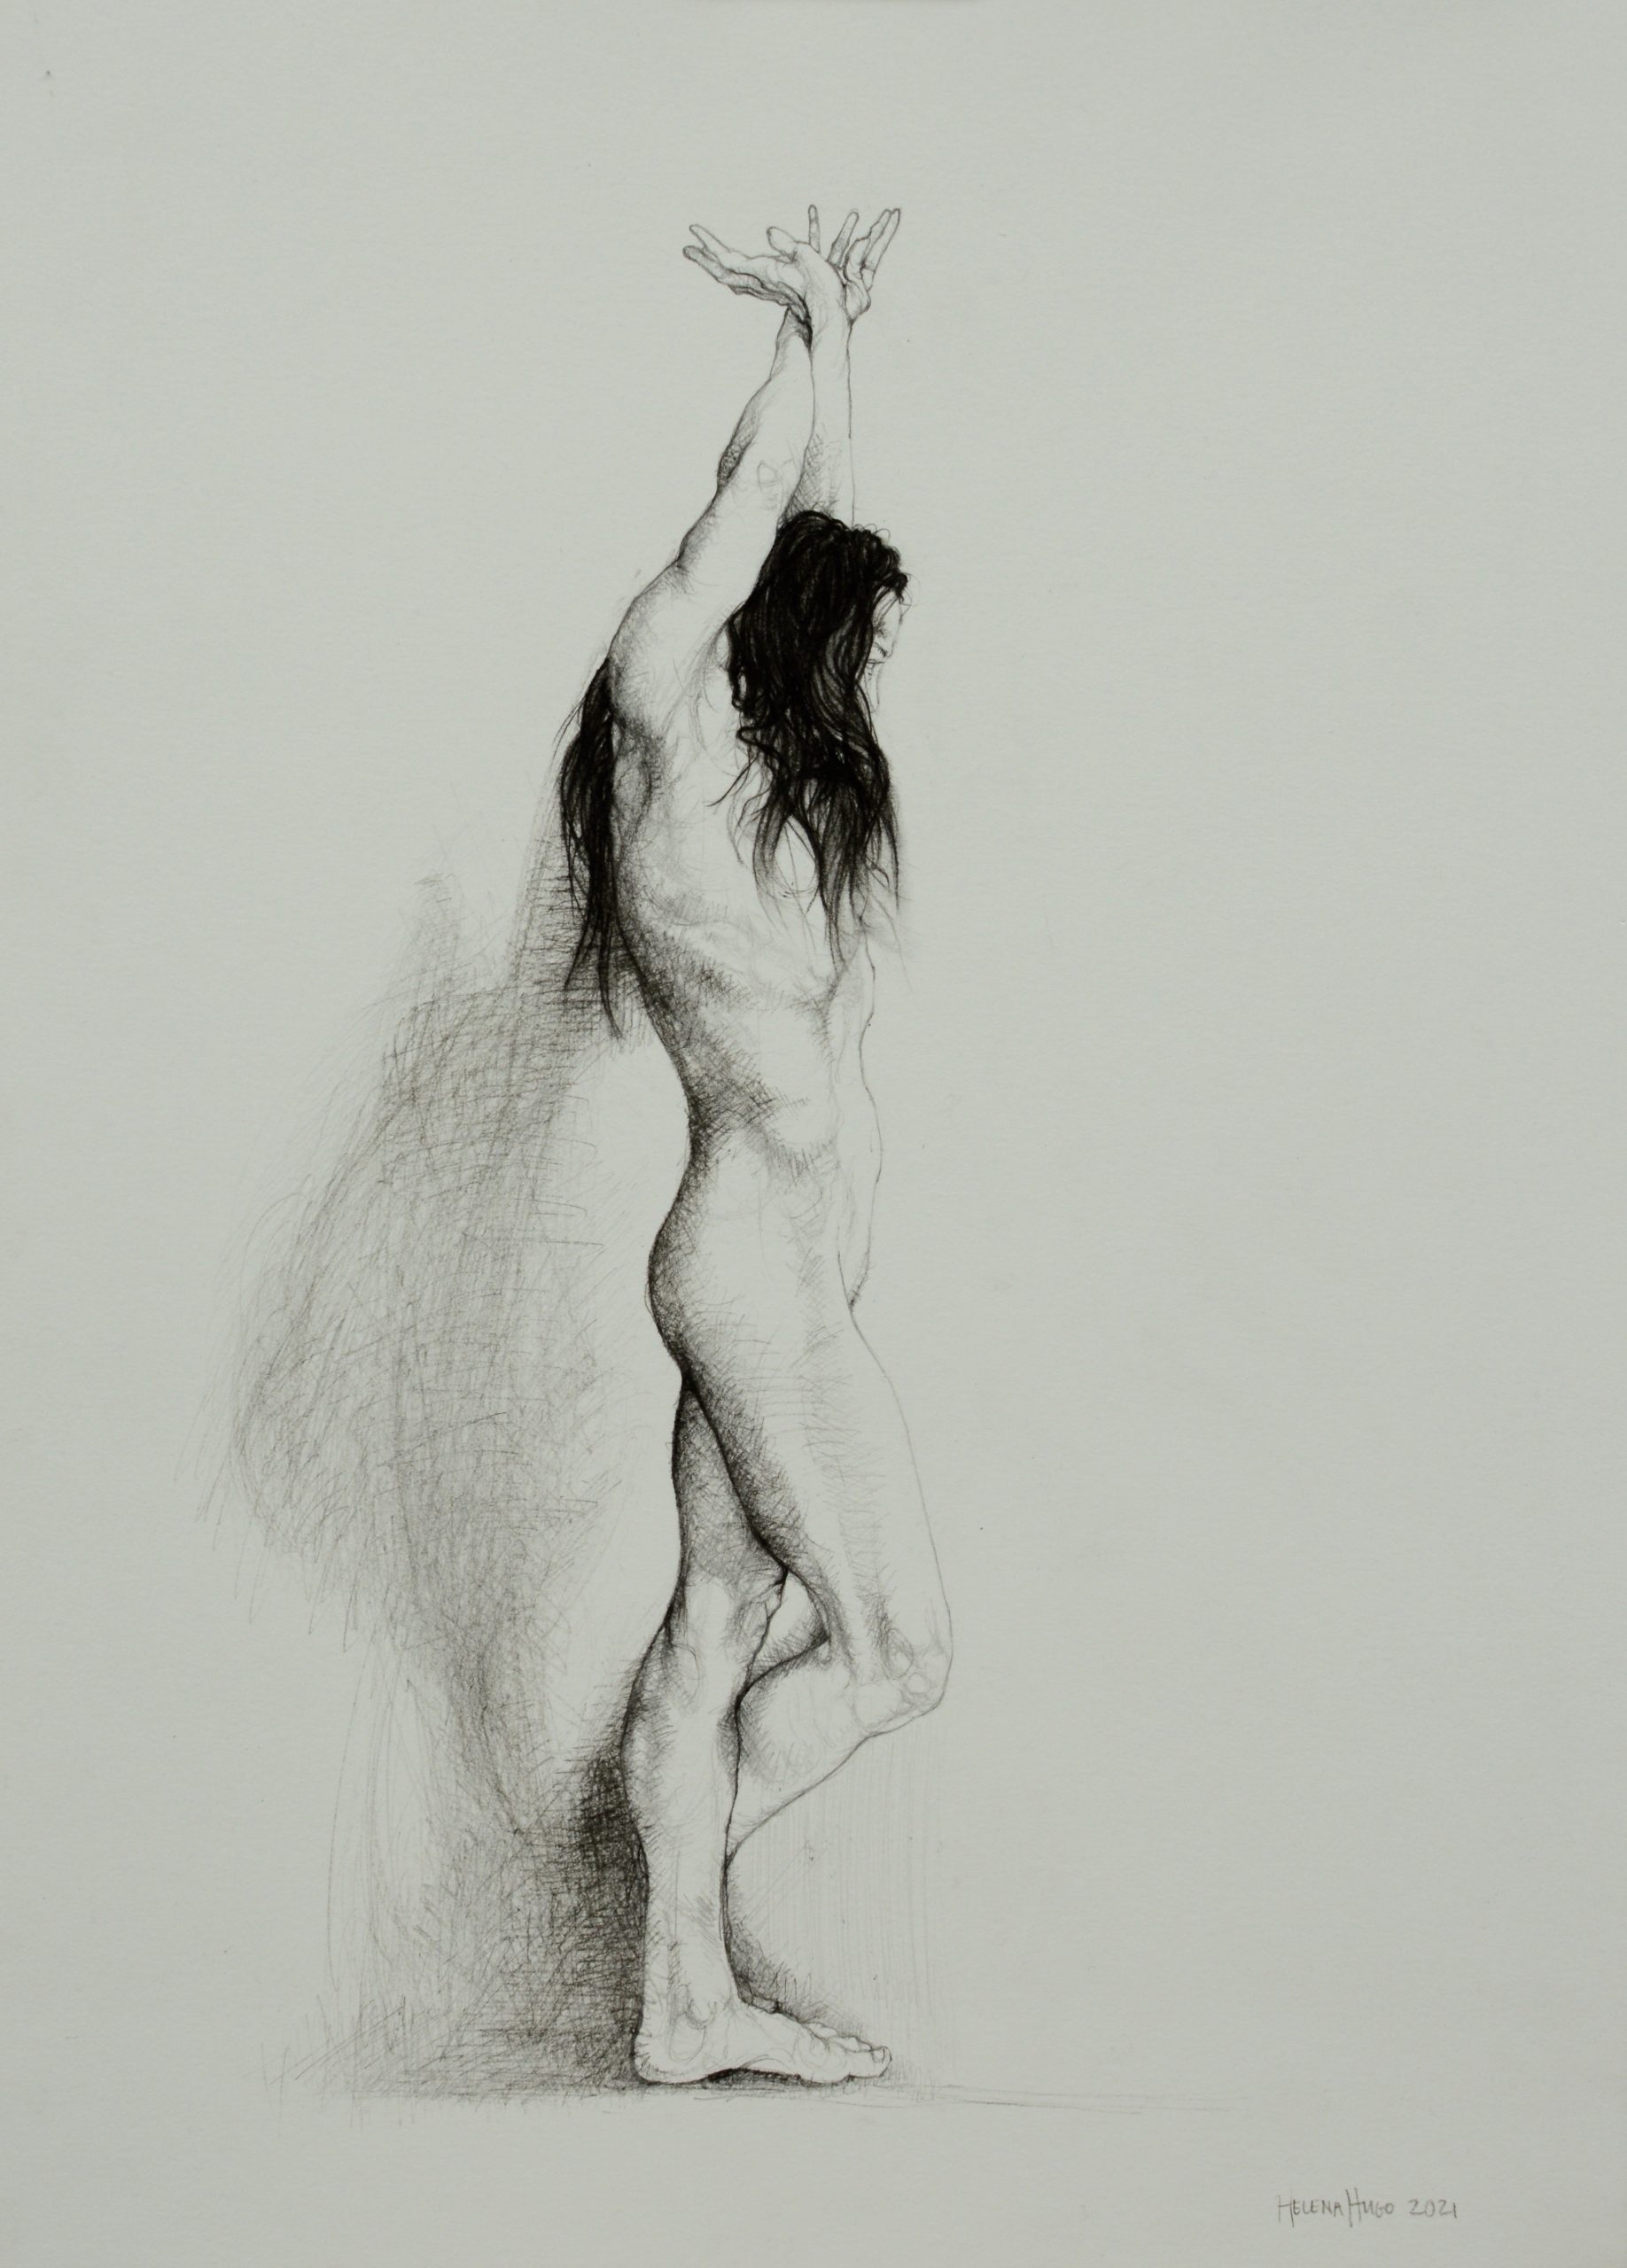 Pose as a Windswept Tree III, 42cm x 30cm, woodless charcoal on paper